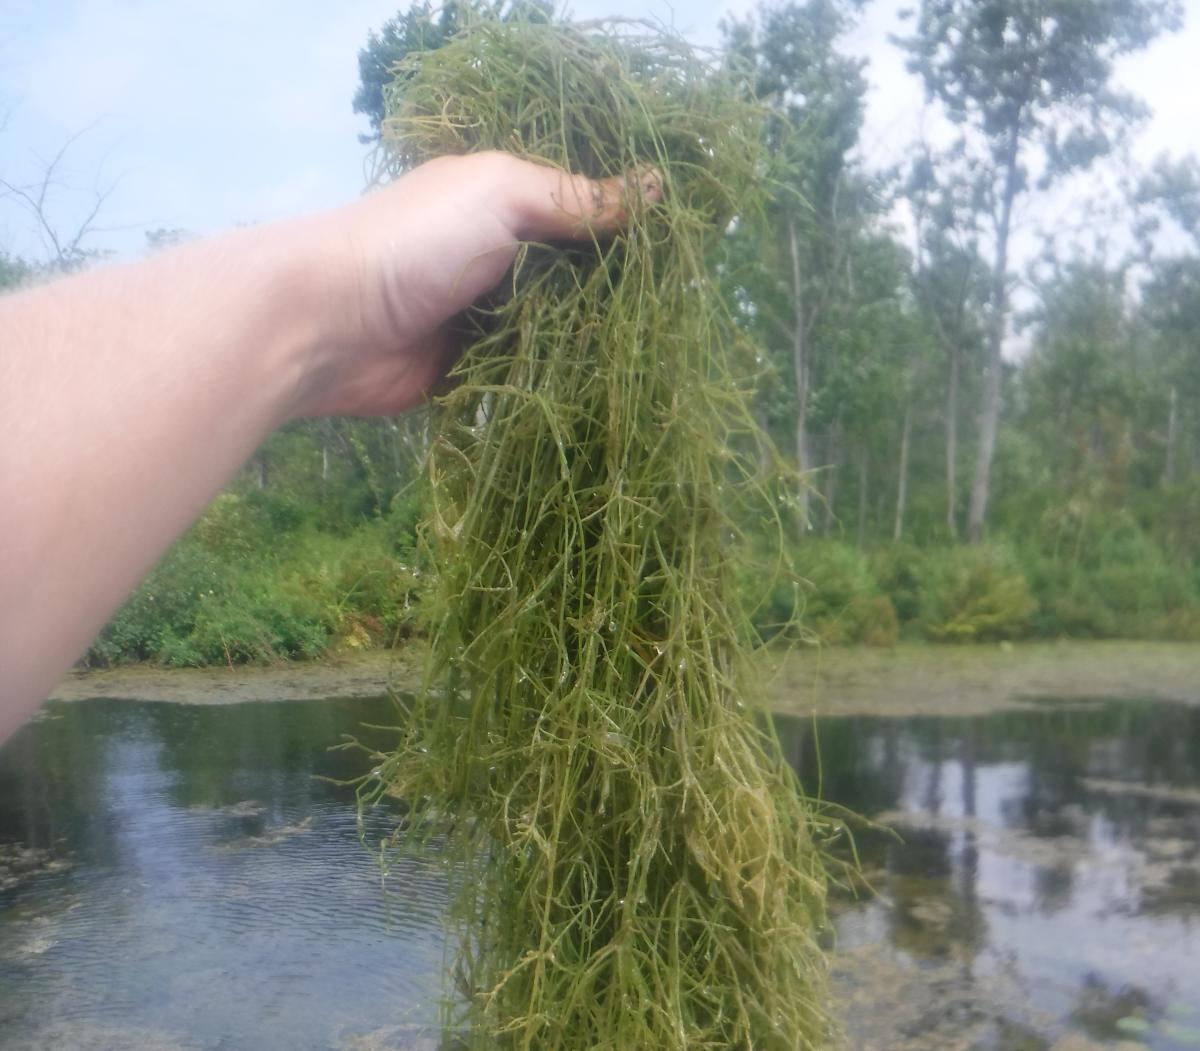 A hand holding up a dense clump of stringy water weeds. In the background is the edge of a body of water.